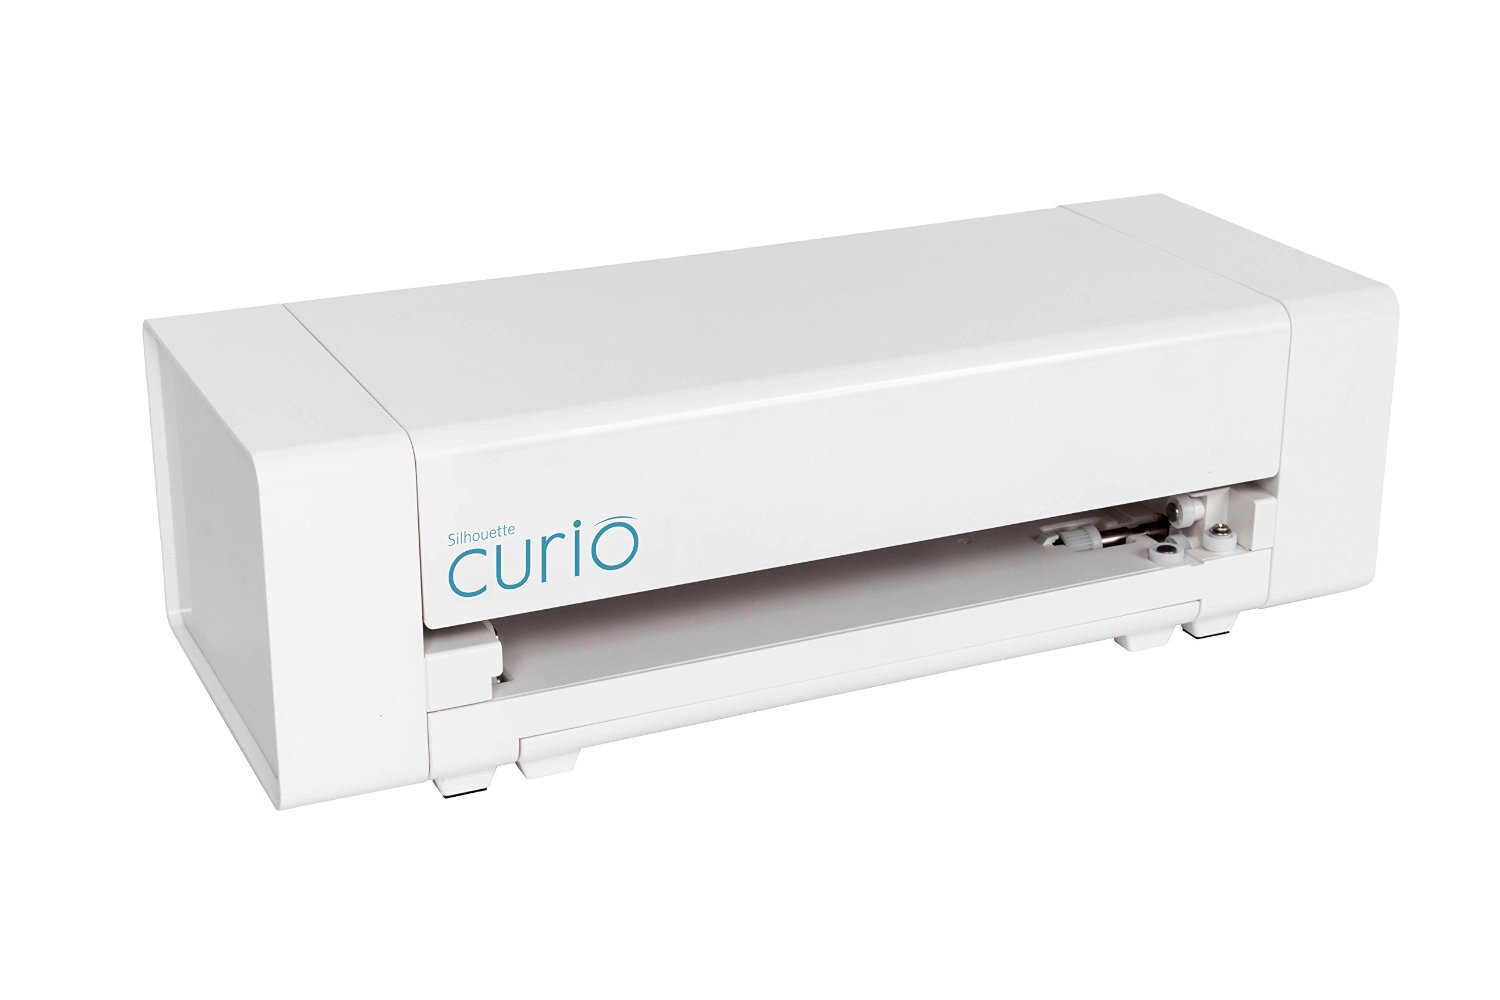 Silhouette Curio Cutting Tool – Just $115.00!